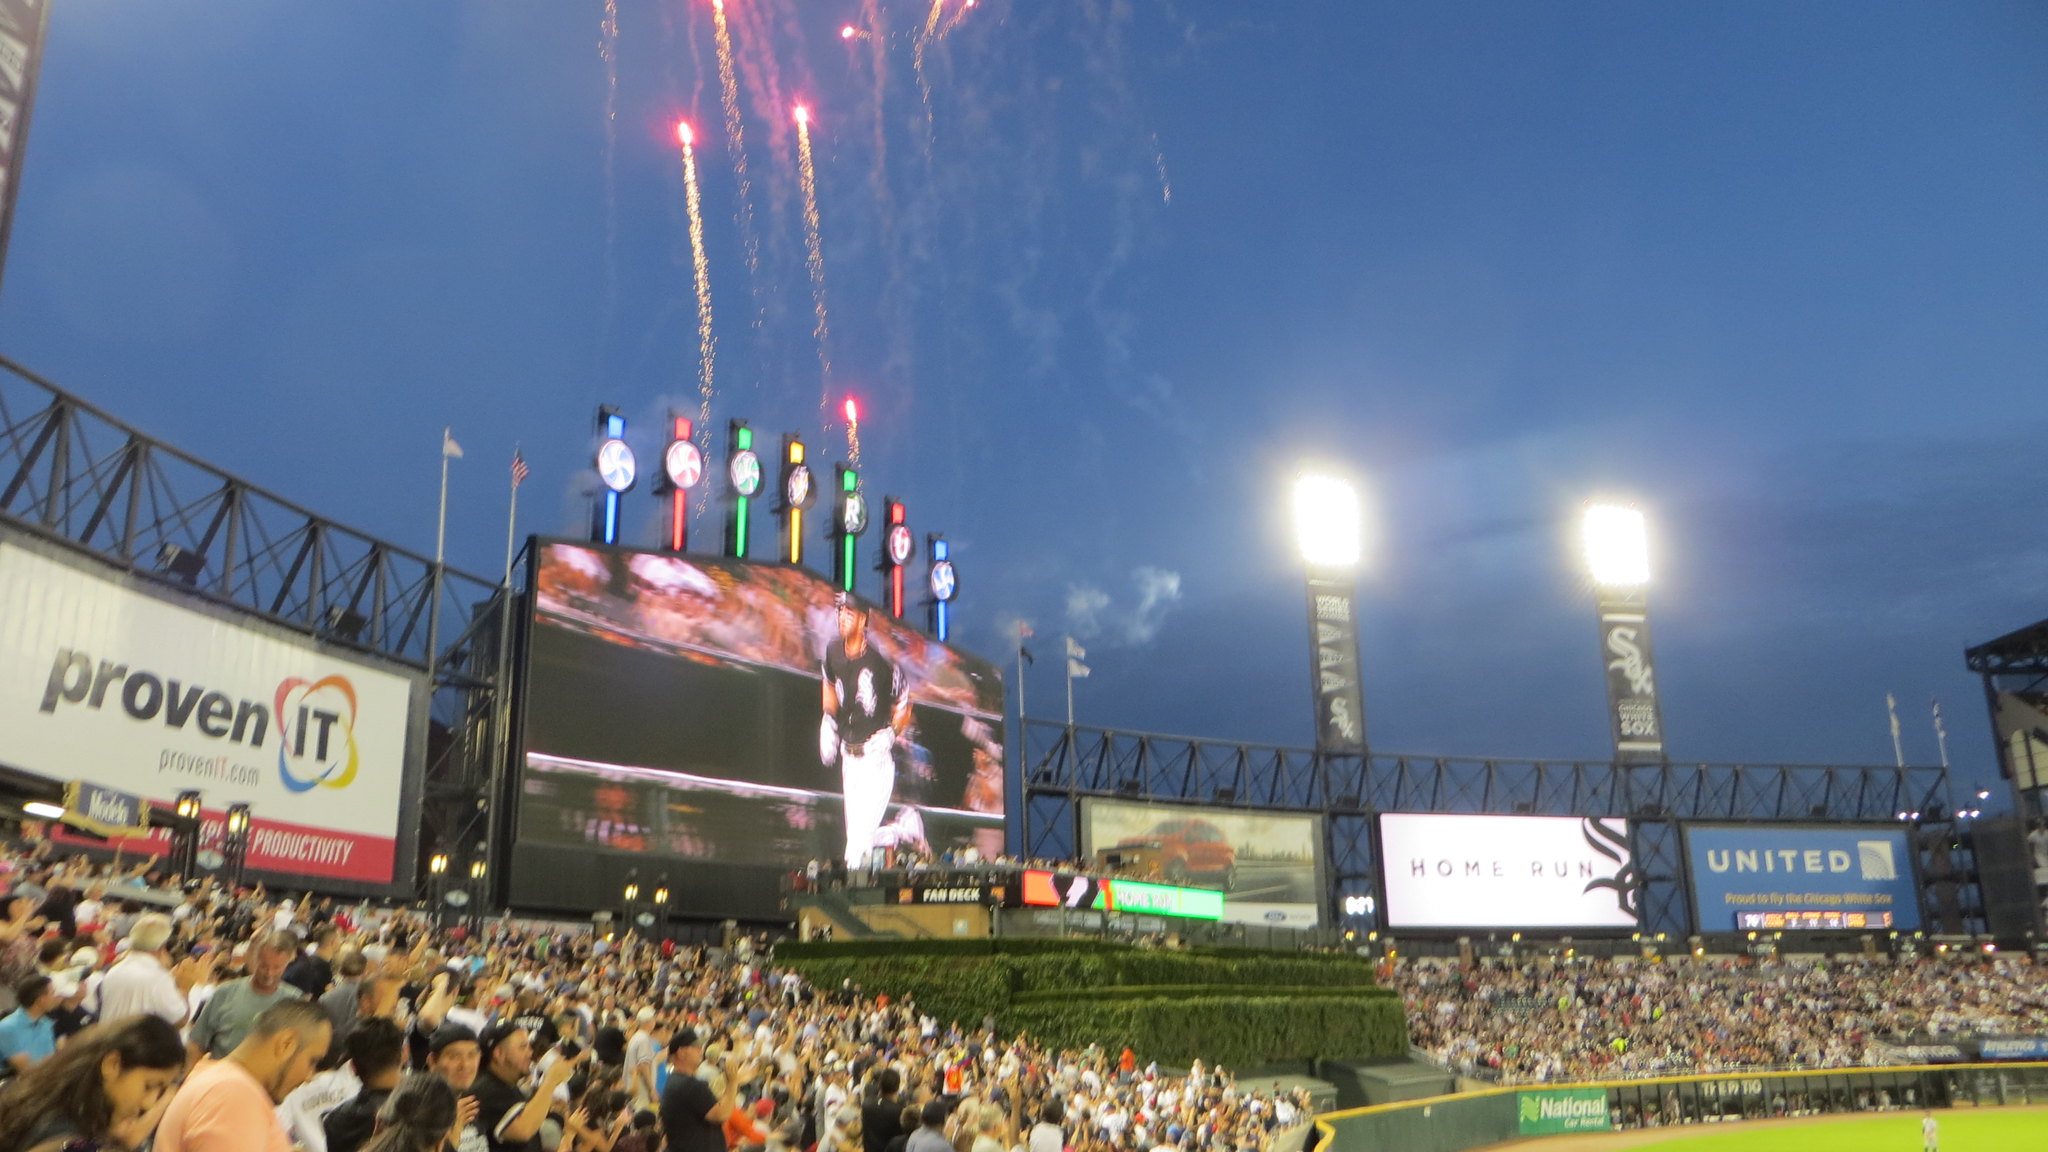 Why White Sox Fans Should Thank the Chicago Cubs